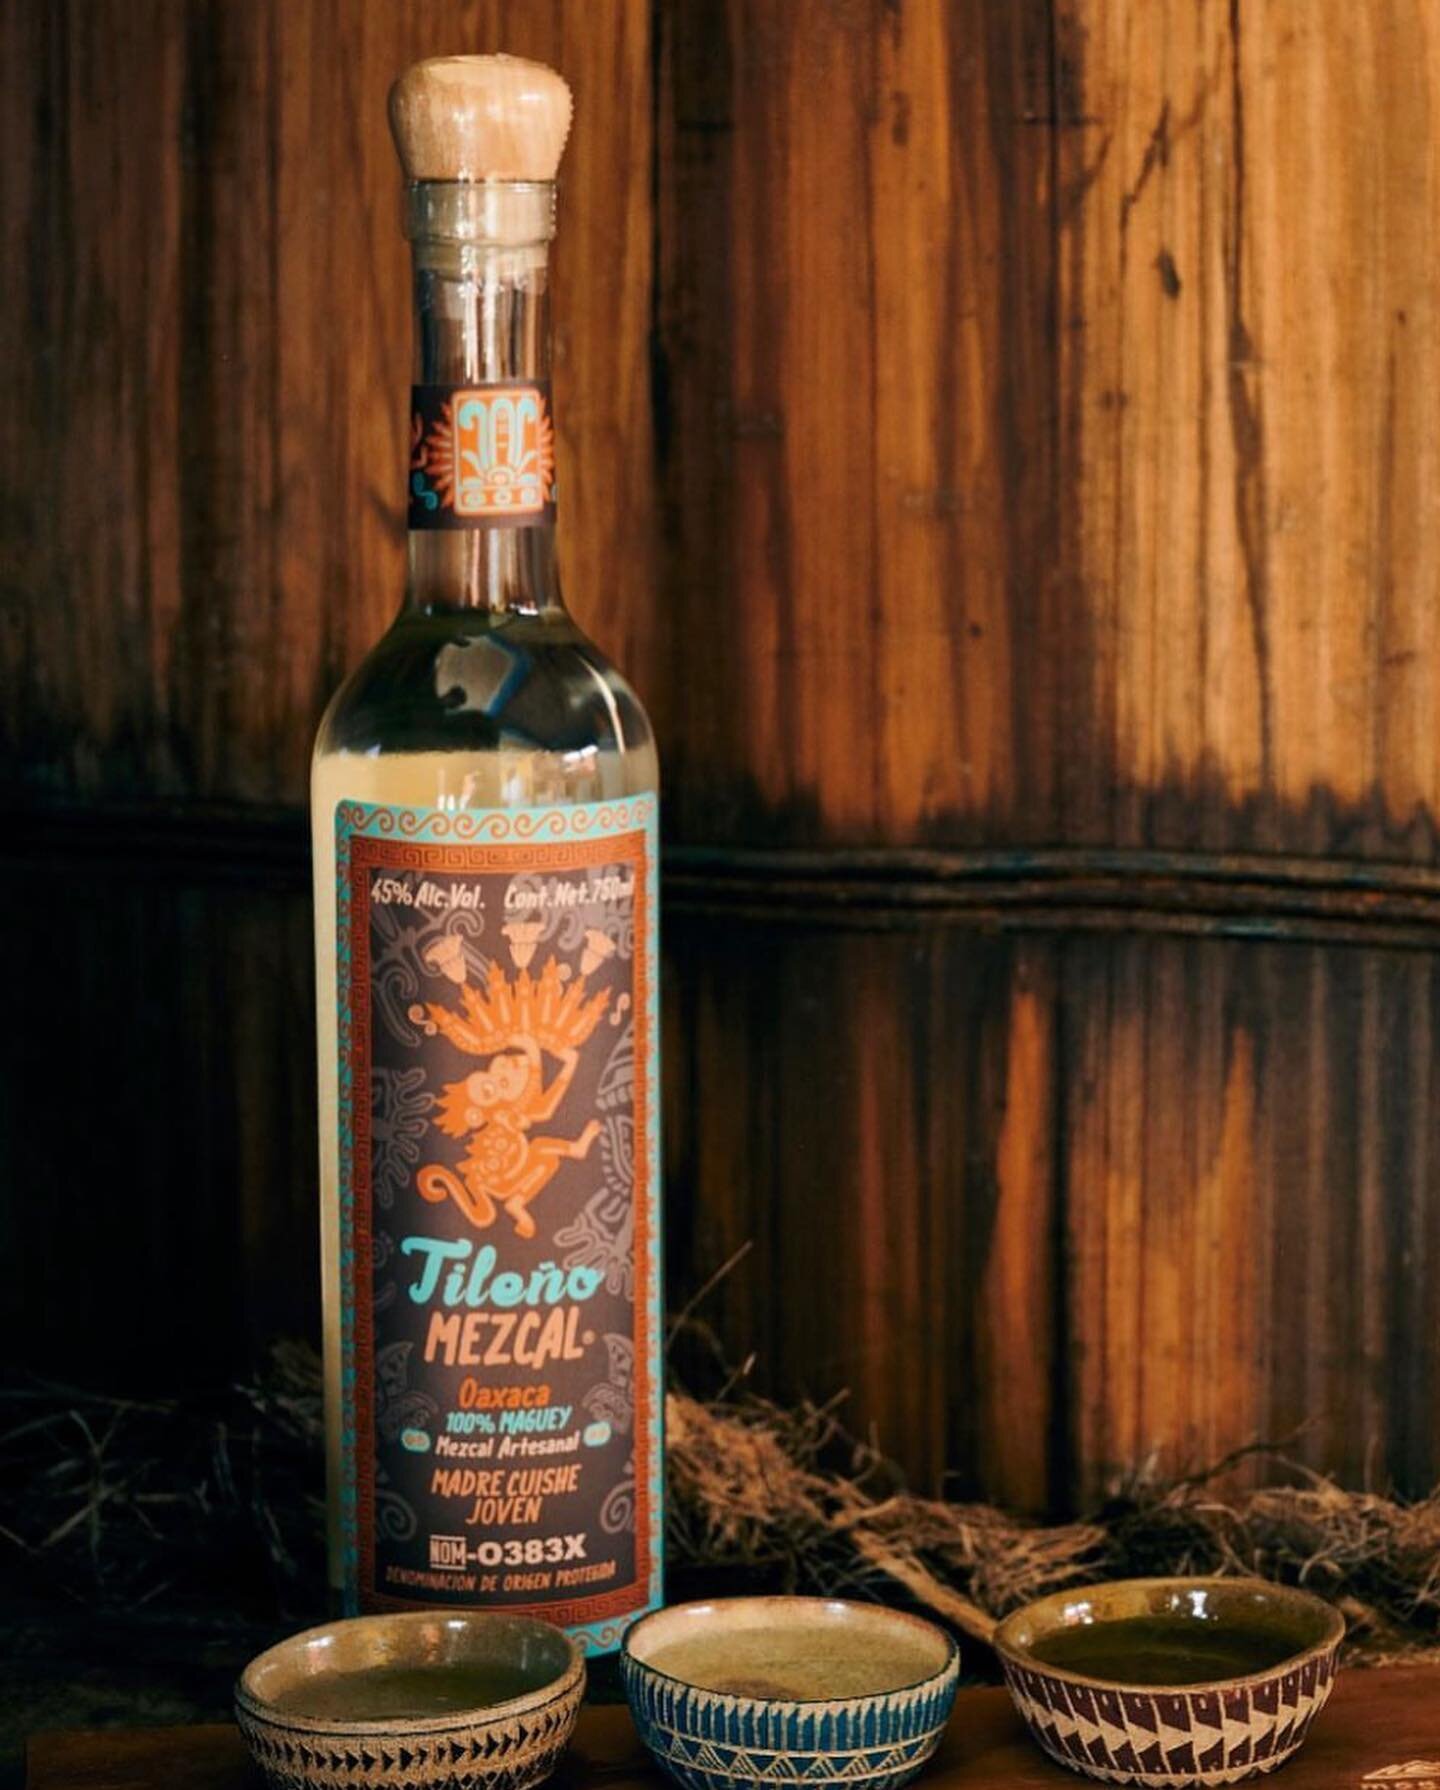 Tile&ntilde;o Mezcal : 

100% organic and artisanal product cultivated in San Baltazar Guelavila and bottled in San Mart&iacute;n Tilcajete, two Zapotec towns located in the Central Valleys region of Oaxaca State.

The brand is based on the ancient t